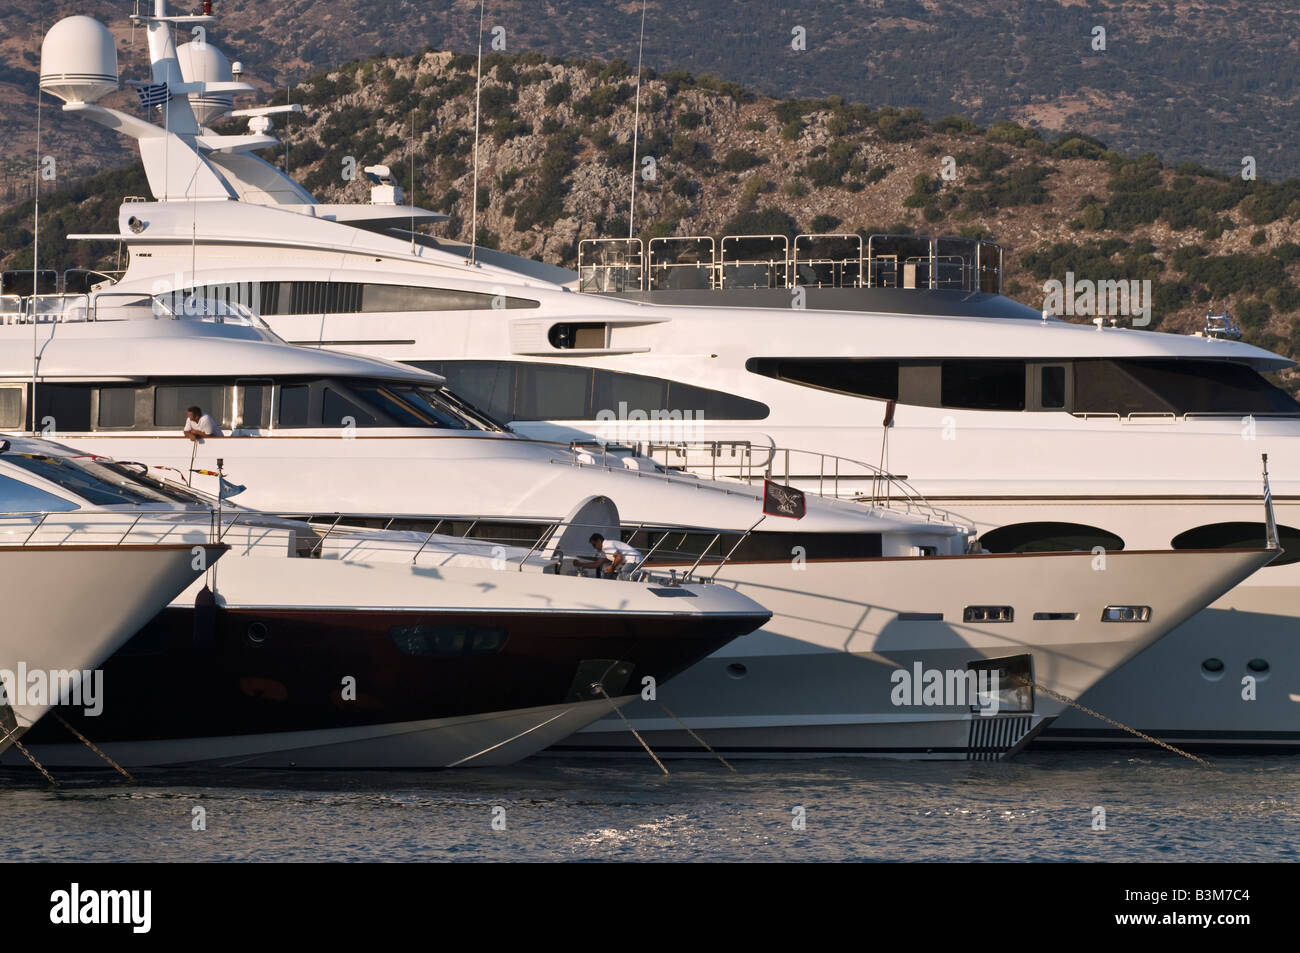 Luxury yachts moored in the harbour at Argostoli Cephallonia Ionian islands Greece Stock Photo